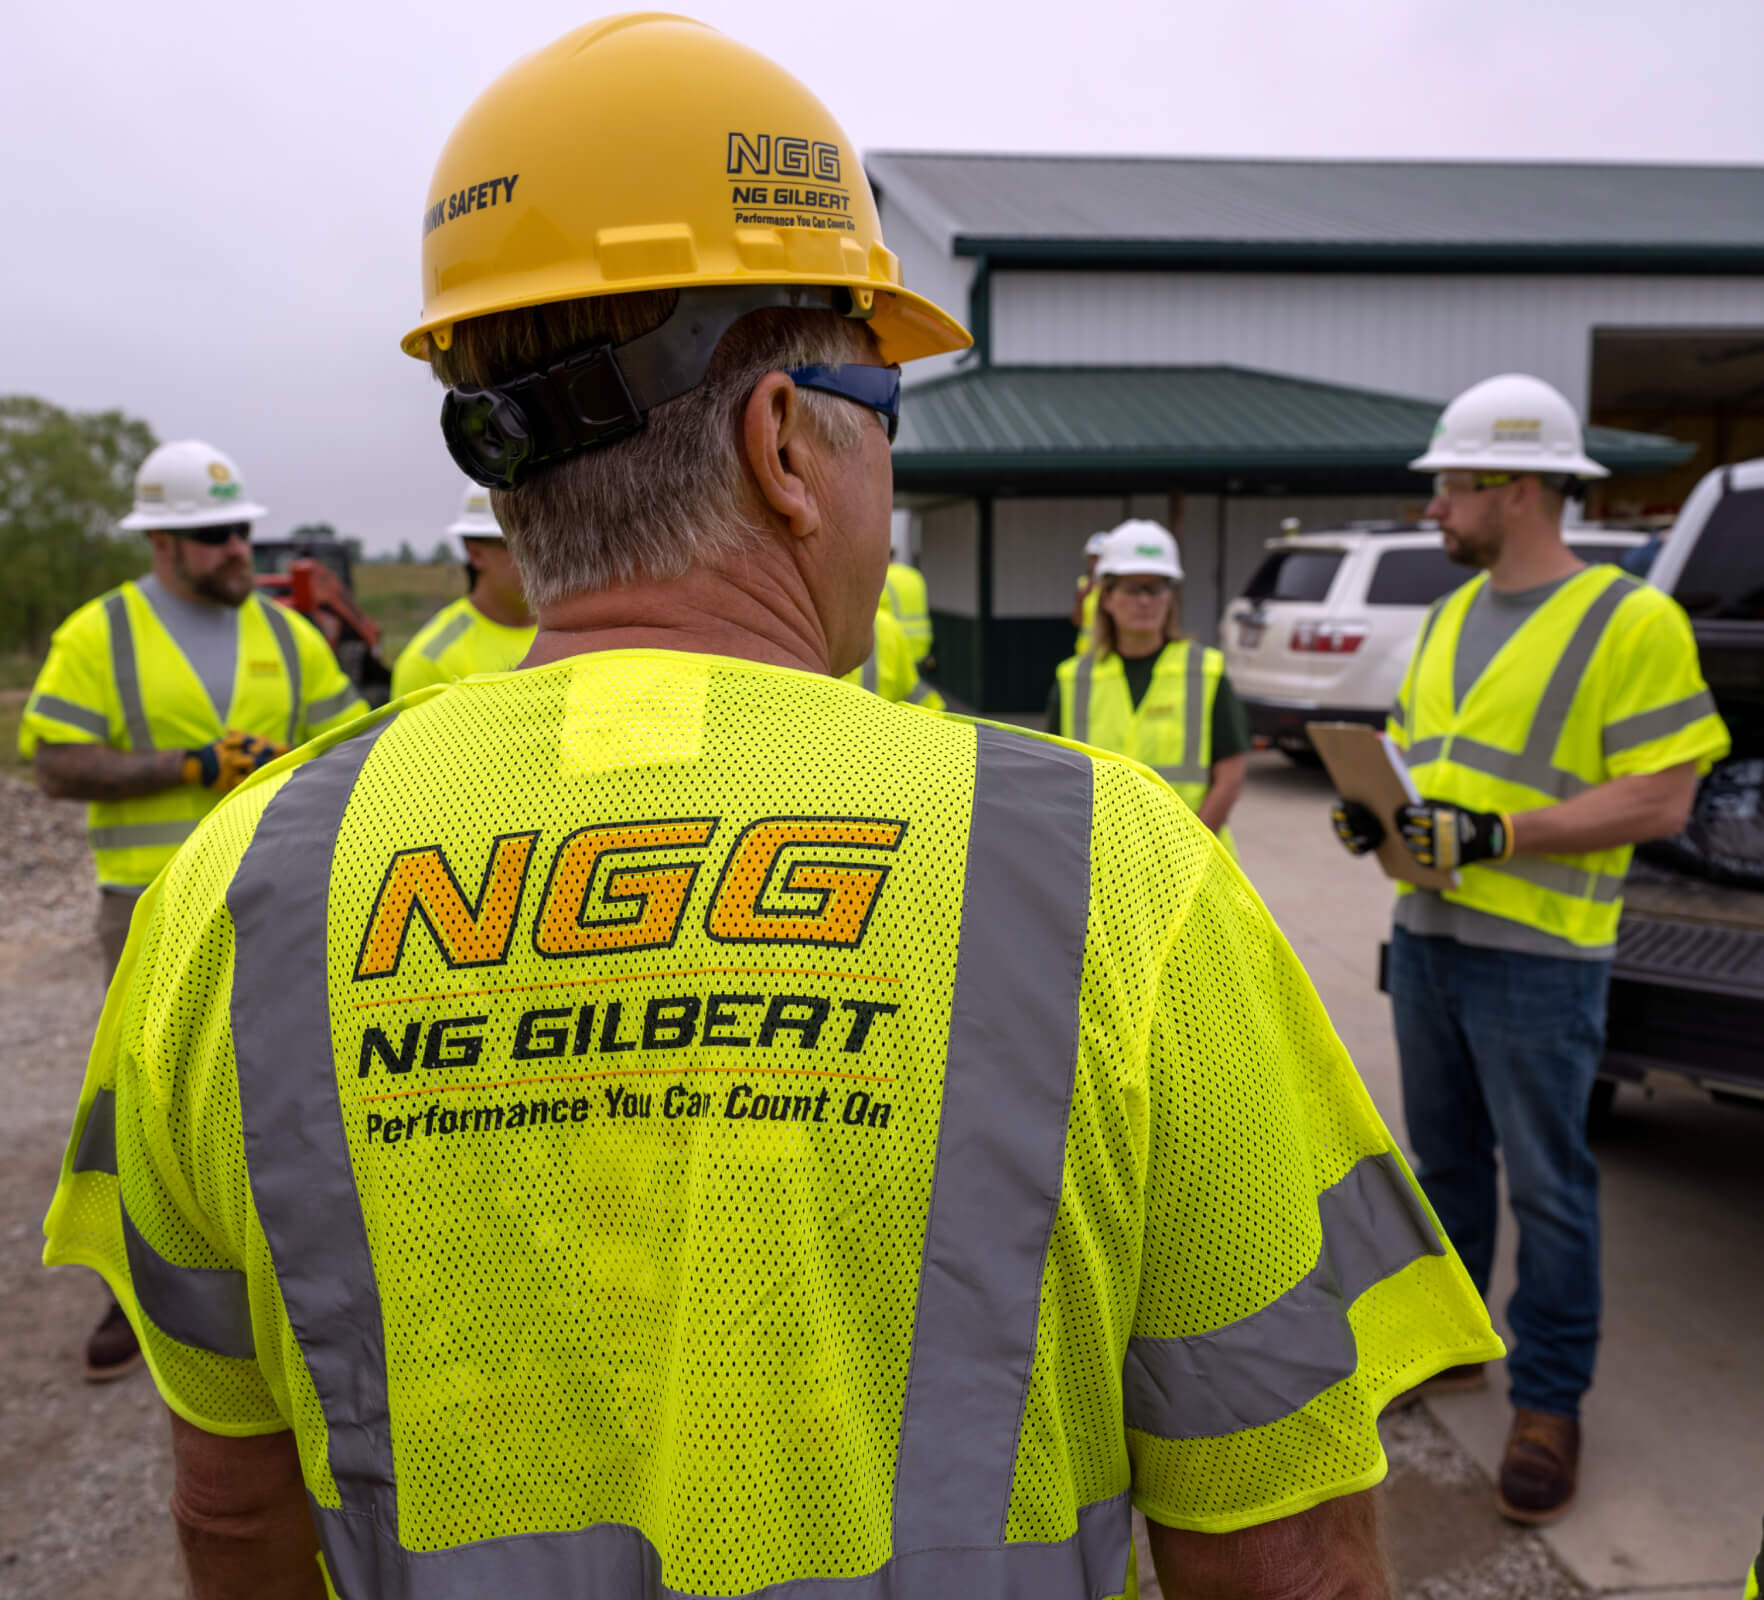 An NG Gilbert crew member with his back turned to the camera and facing other team members. All wear safety vests and hard hats as they stand outside a job site.